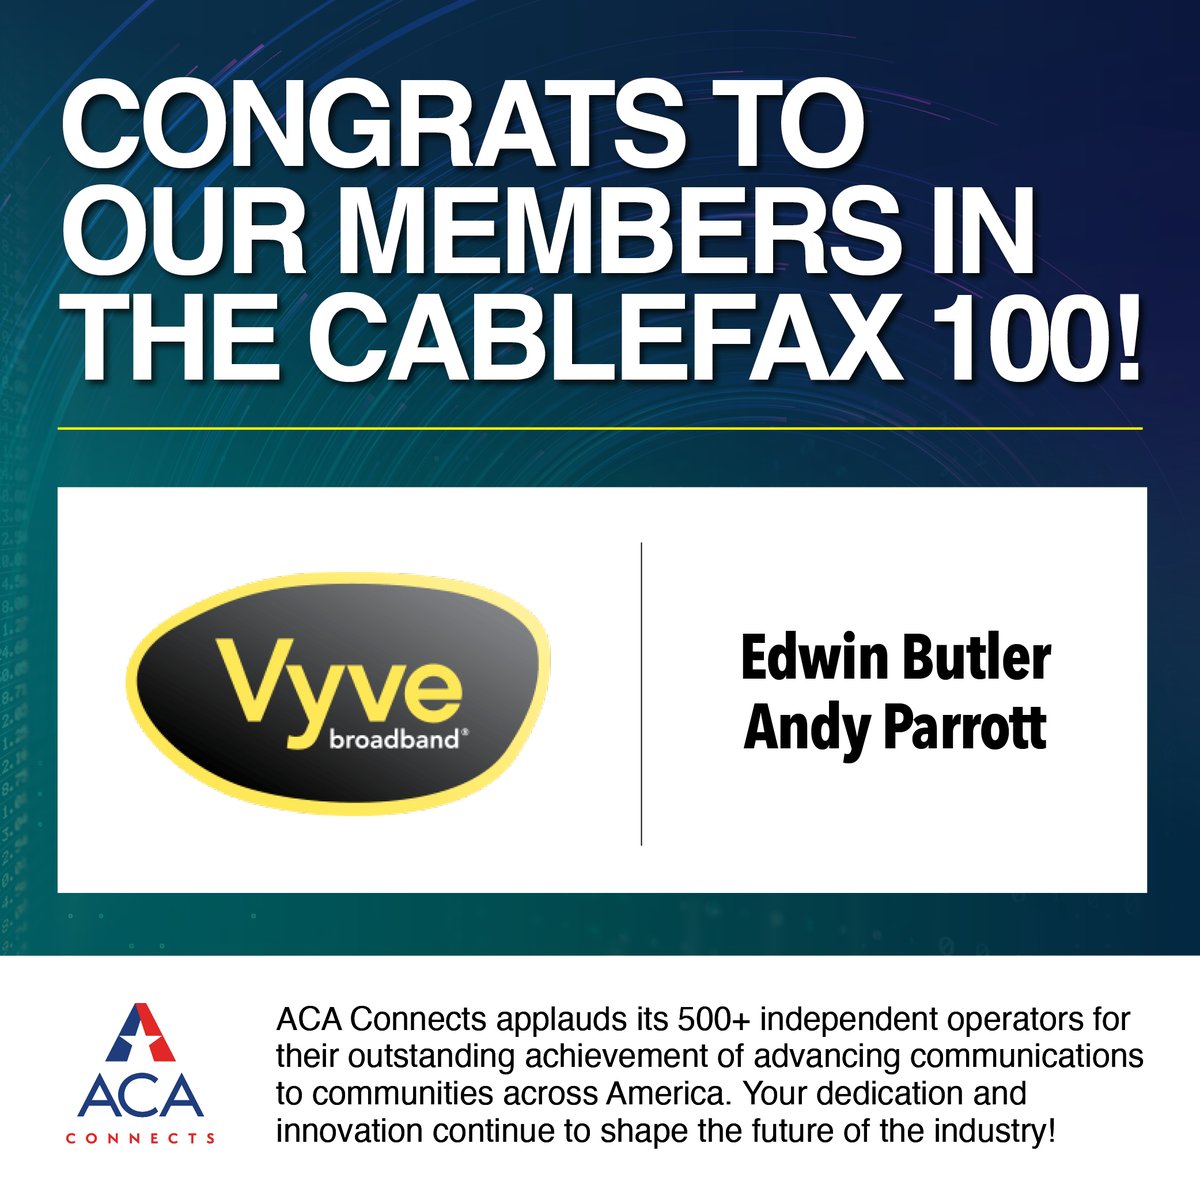 Congratulations to Edwin Butler and Andy Parrott of @VyveBroadband, an ACA Connects Member, for being honored in the @Cablefax 100 issue. cablefax.com/event/cablefax…